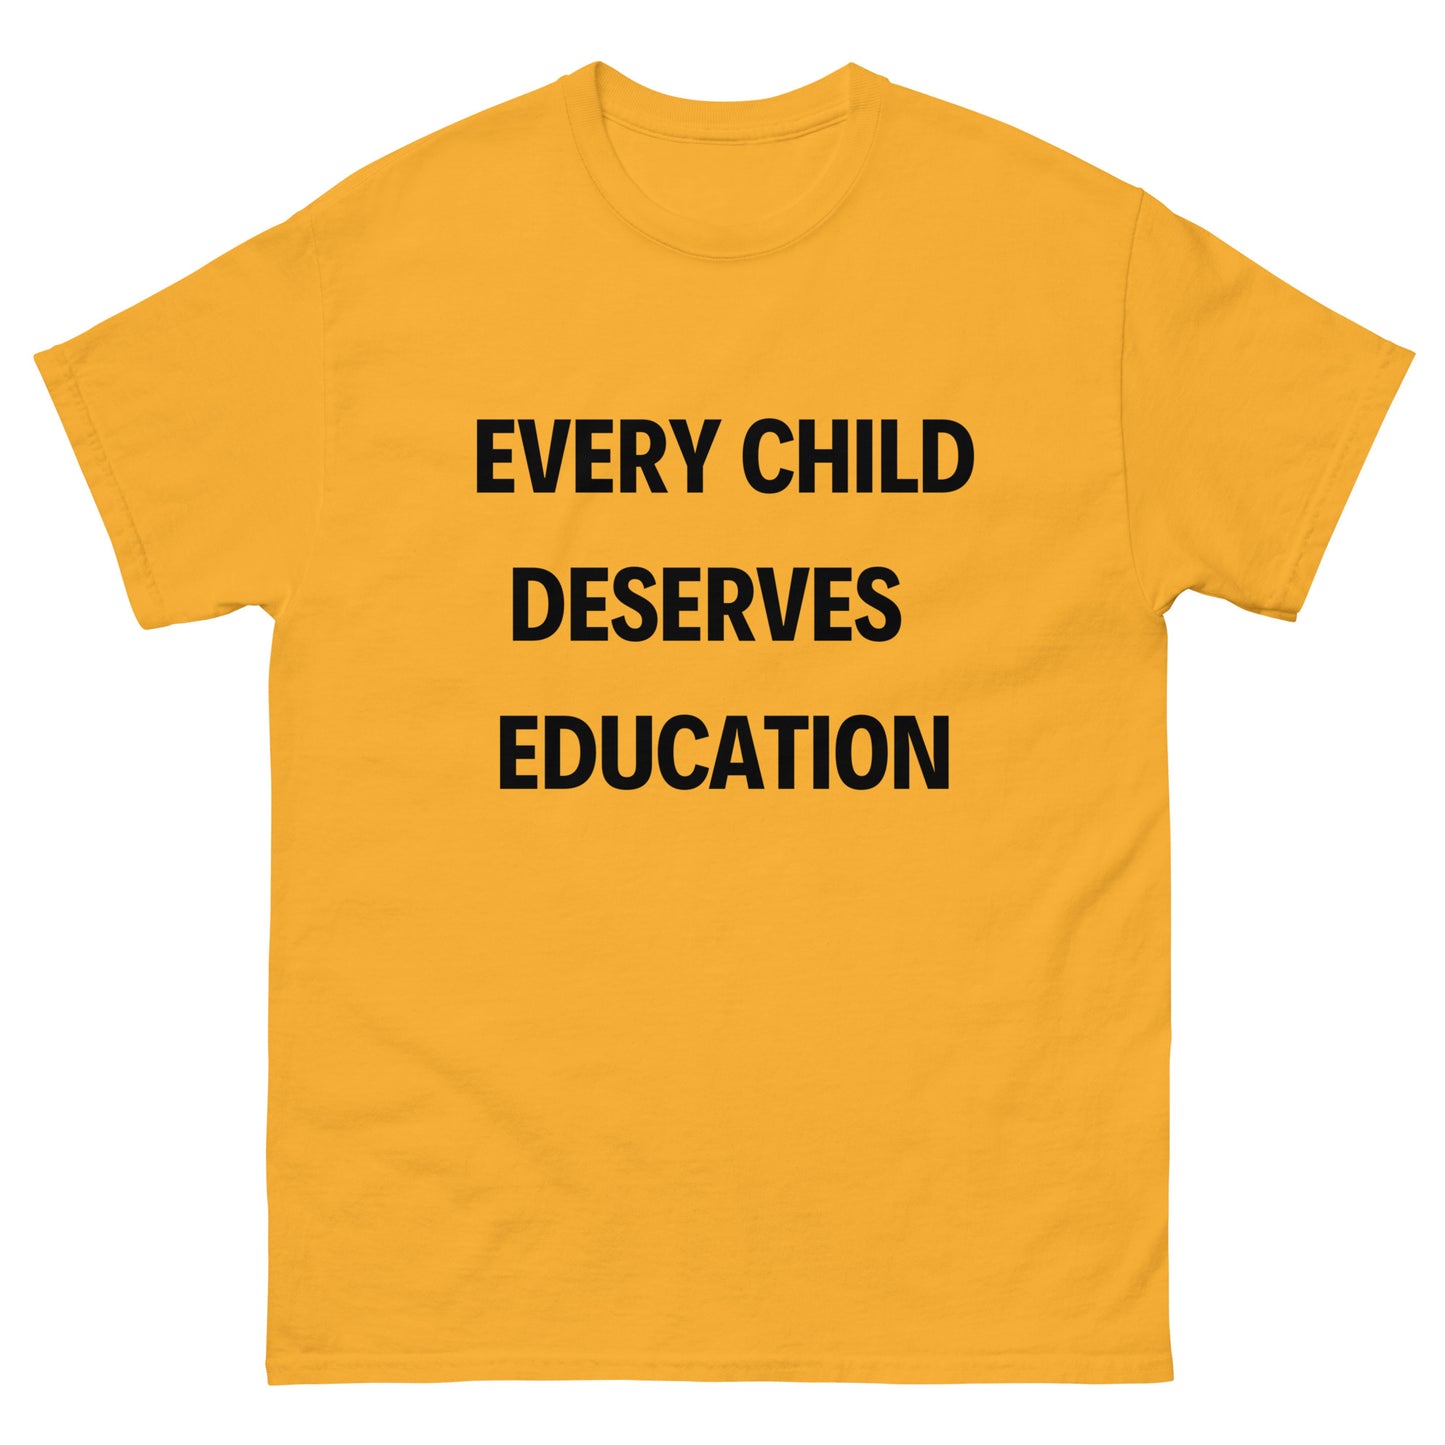 Every Child Deserves an Education Tee